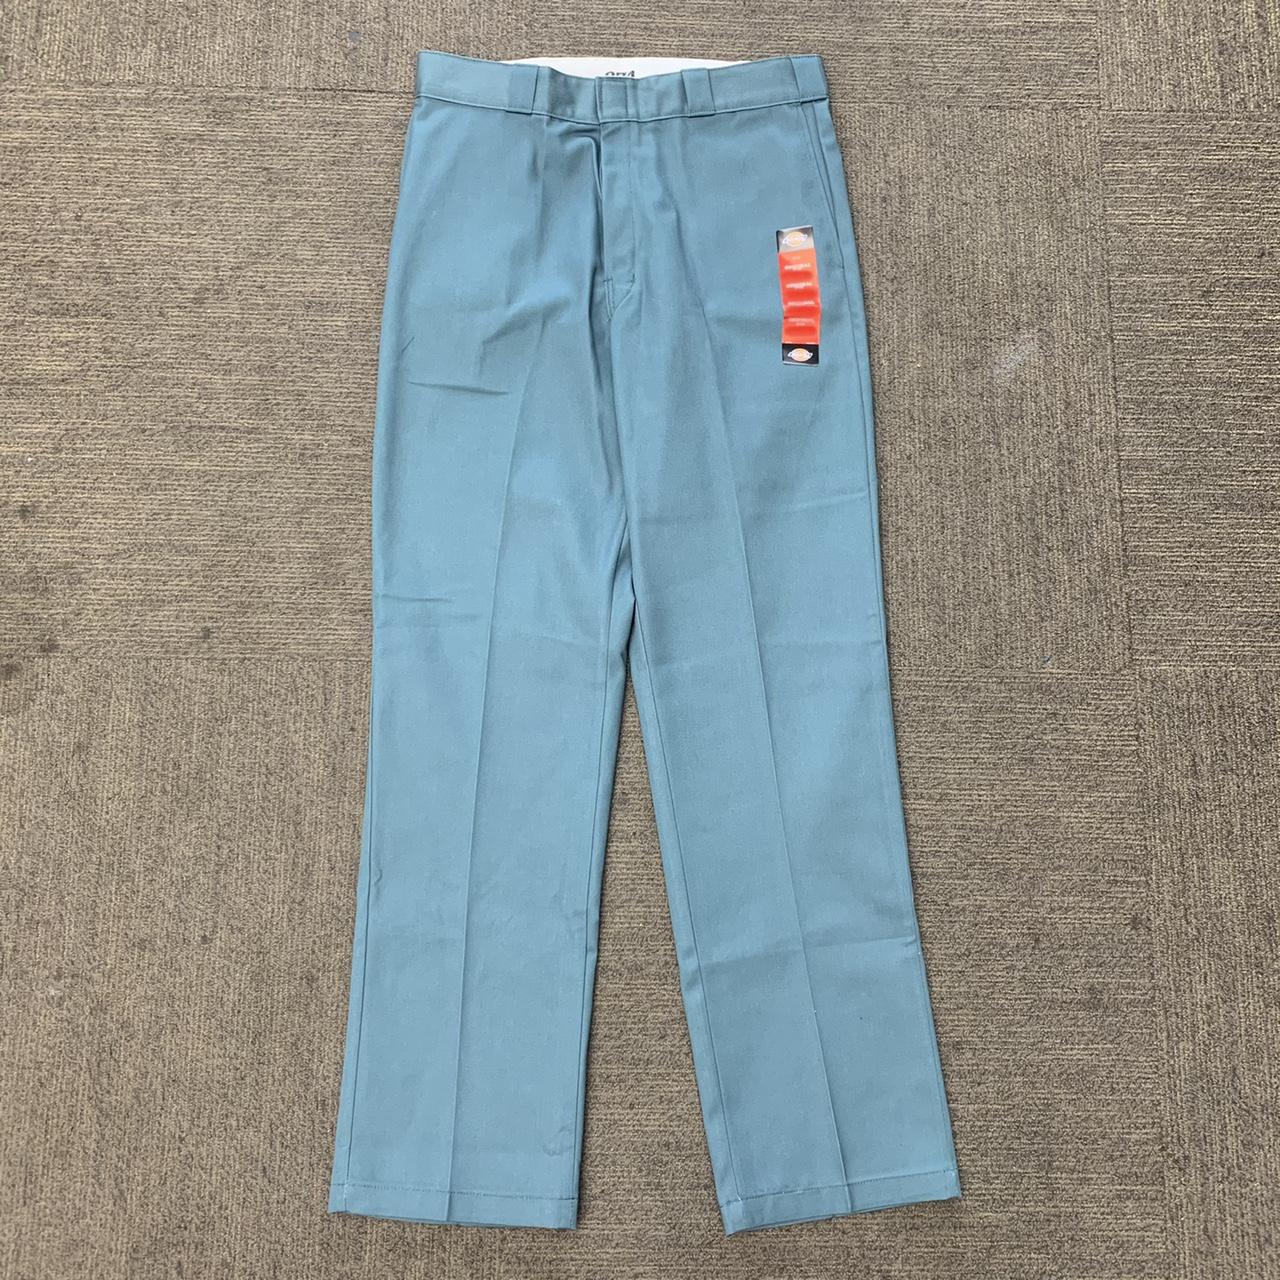 Dickies 874 OG Fit in Lincoln Green WAIST SIZE - Depop